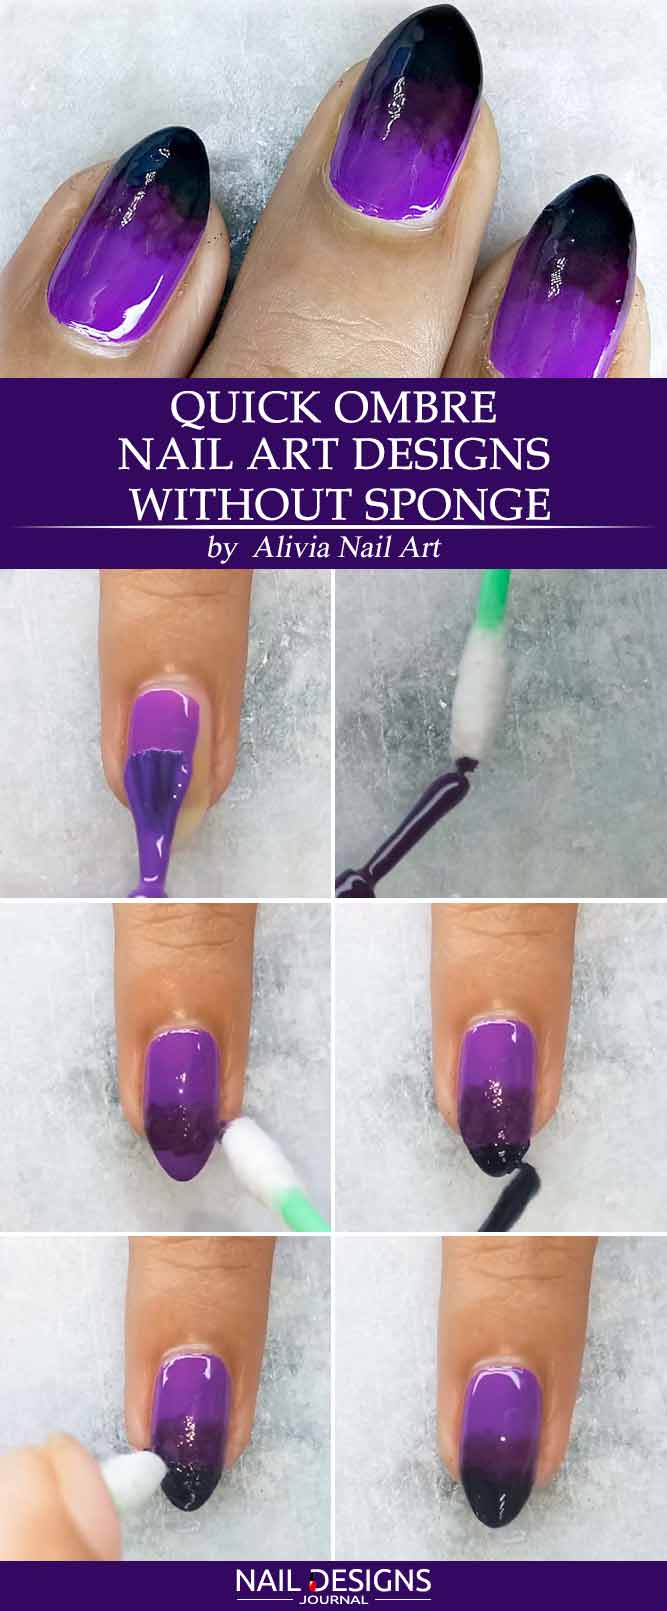 How to Do Ombre Nails Without Sponge picture